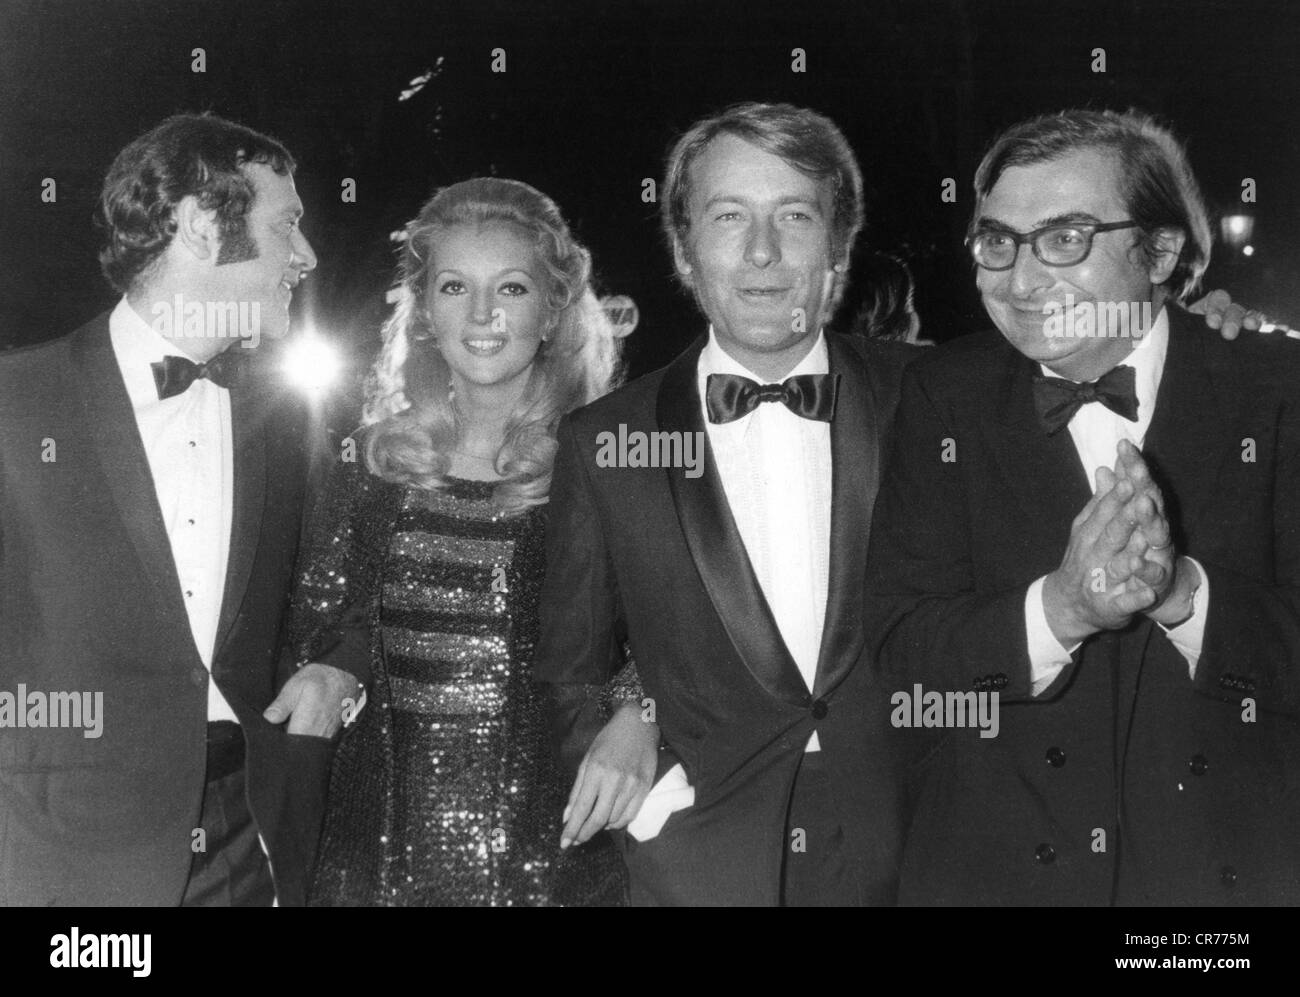 Chabrol, Claude, 24.6.1930 - 12.9.2010, French director (right) with Jean Yanne, Caroline Cellier and Michel Duchaussoy, Night of the Normandy cinema, Champs Elysees, Paris, 4.9.1969, Stock Photo